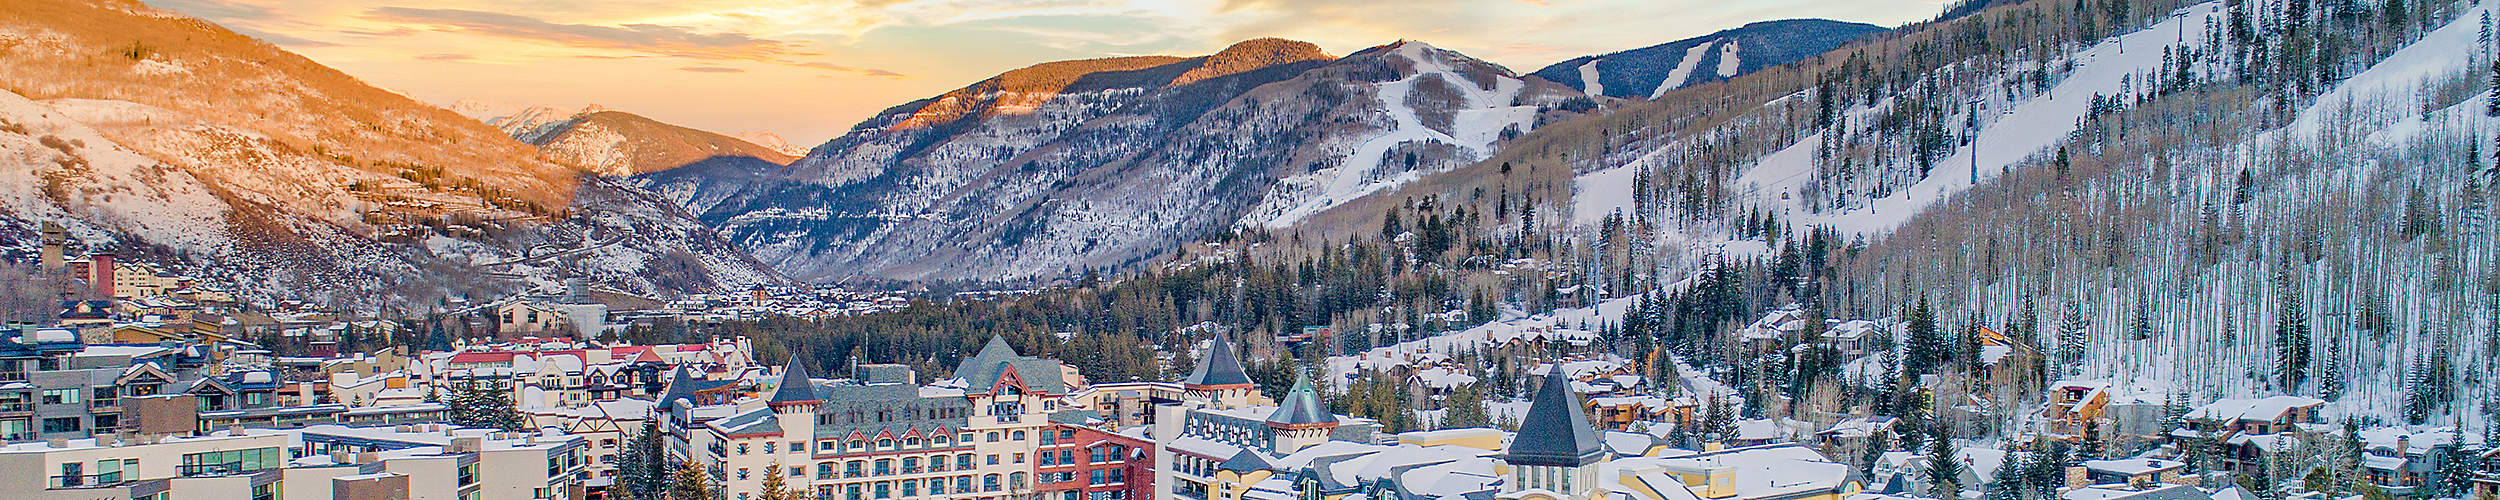 Downtown drone aerial mountain sunset view Vail, CO